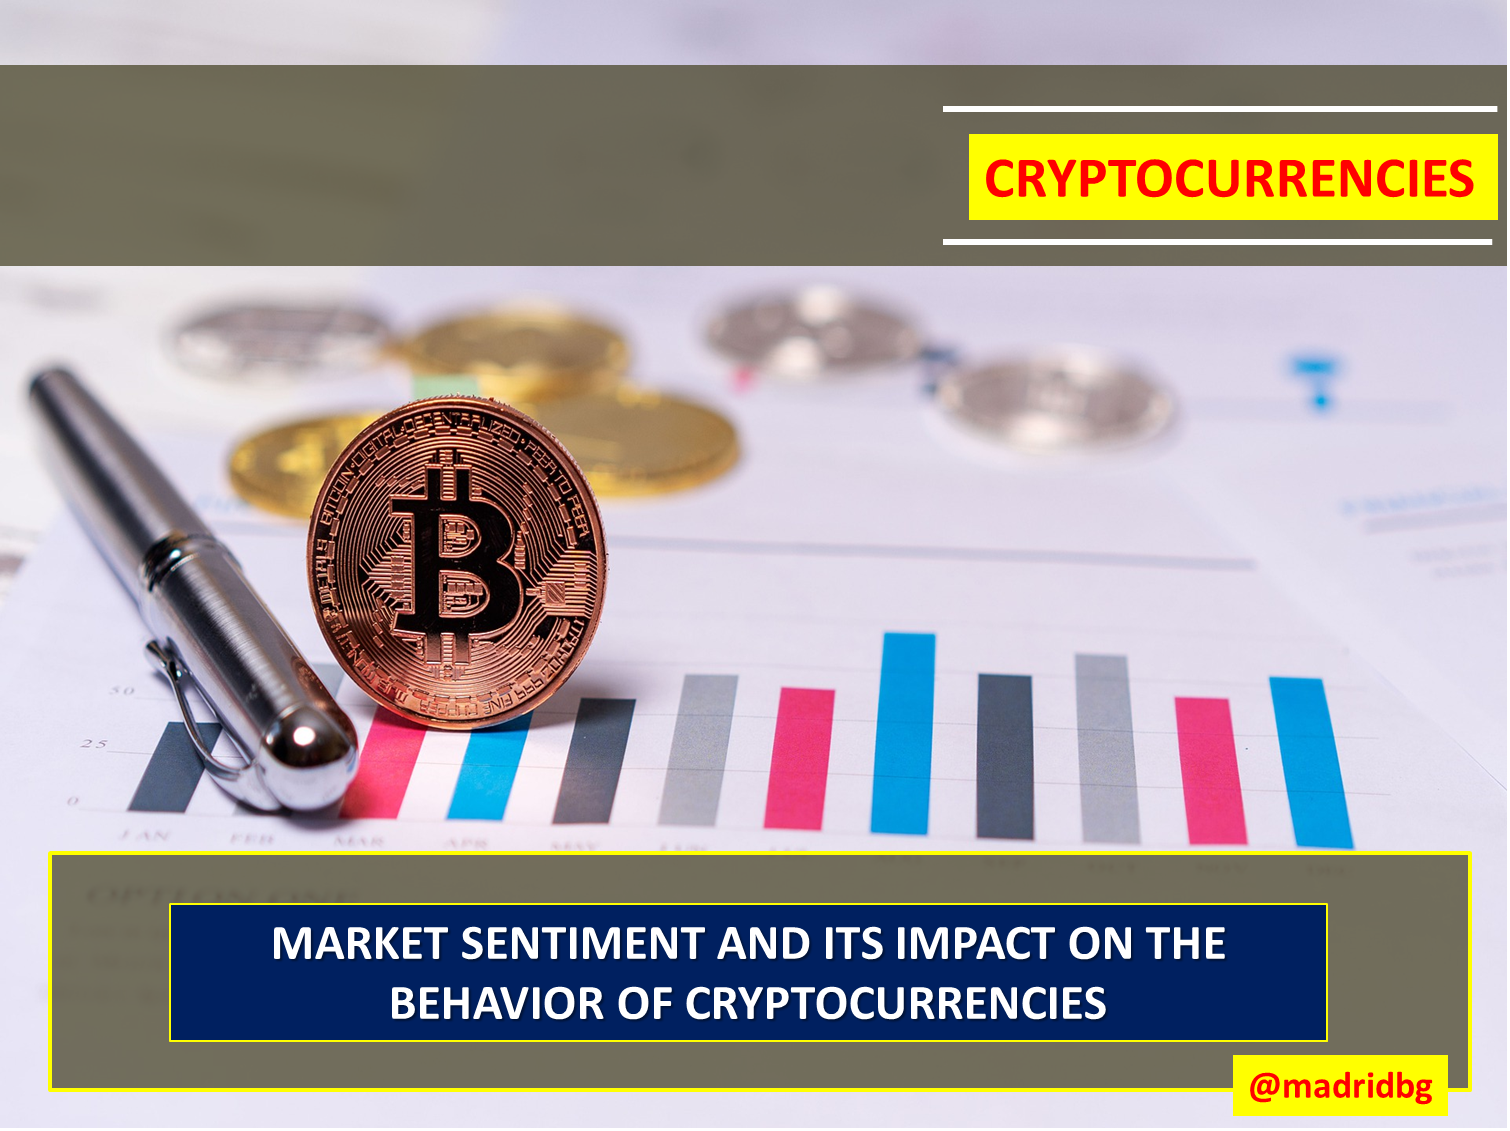 @madridbg/market-sentiment-and-its-impact-on-the-behavior-of-cryptocurrencies